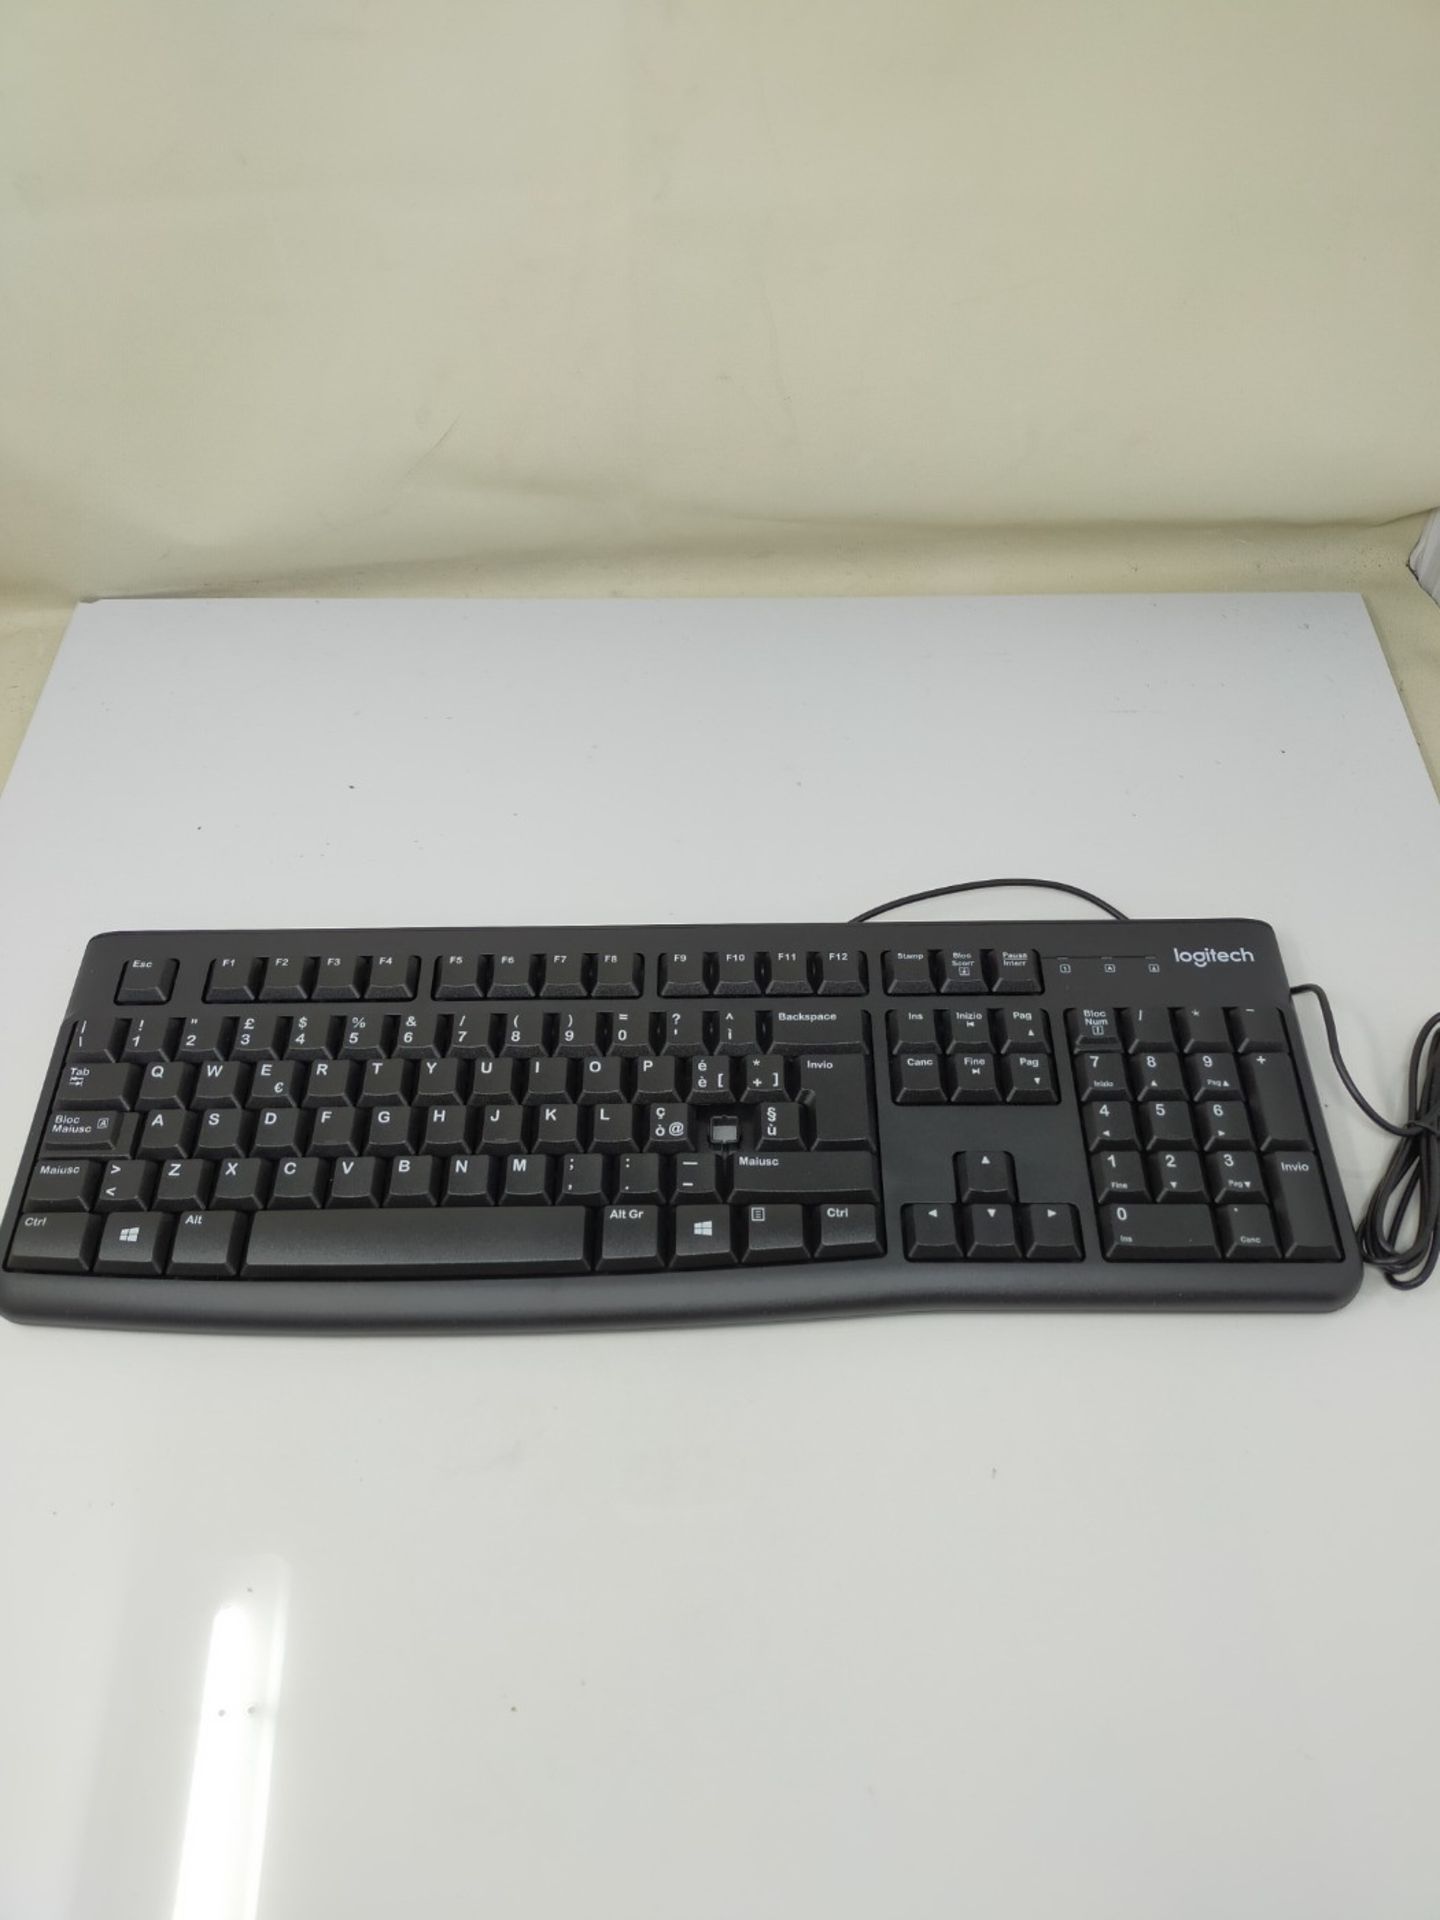 [INCOMPLETE] Logitech K120 Wired Business Keyboard, QWERTY Italian Layout - Black - Image 3 of 3